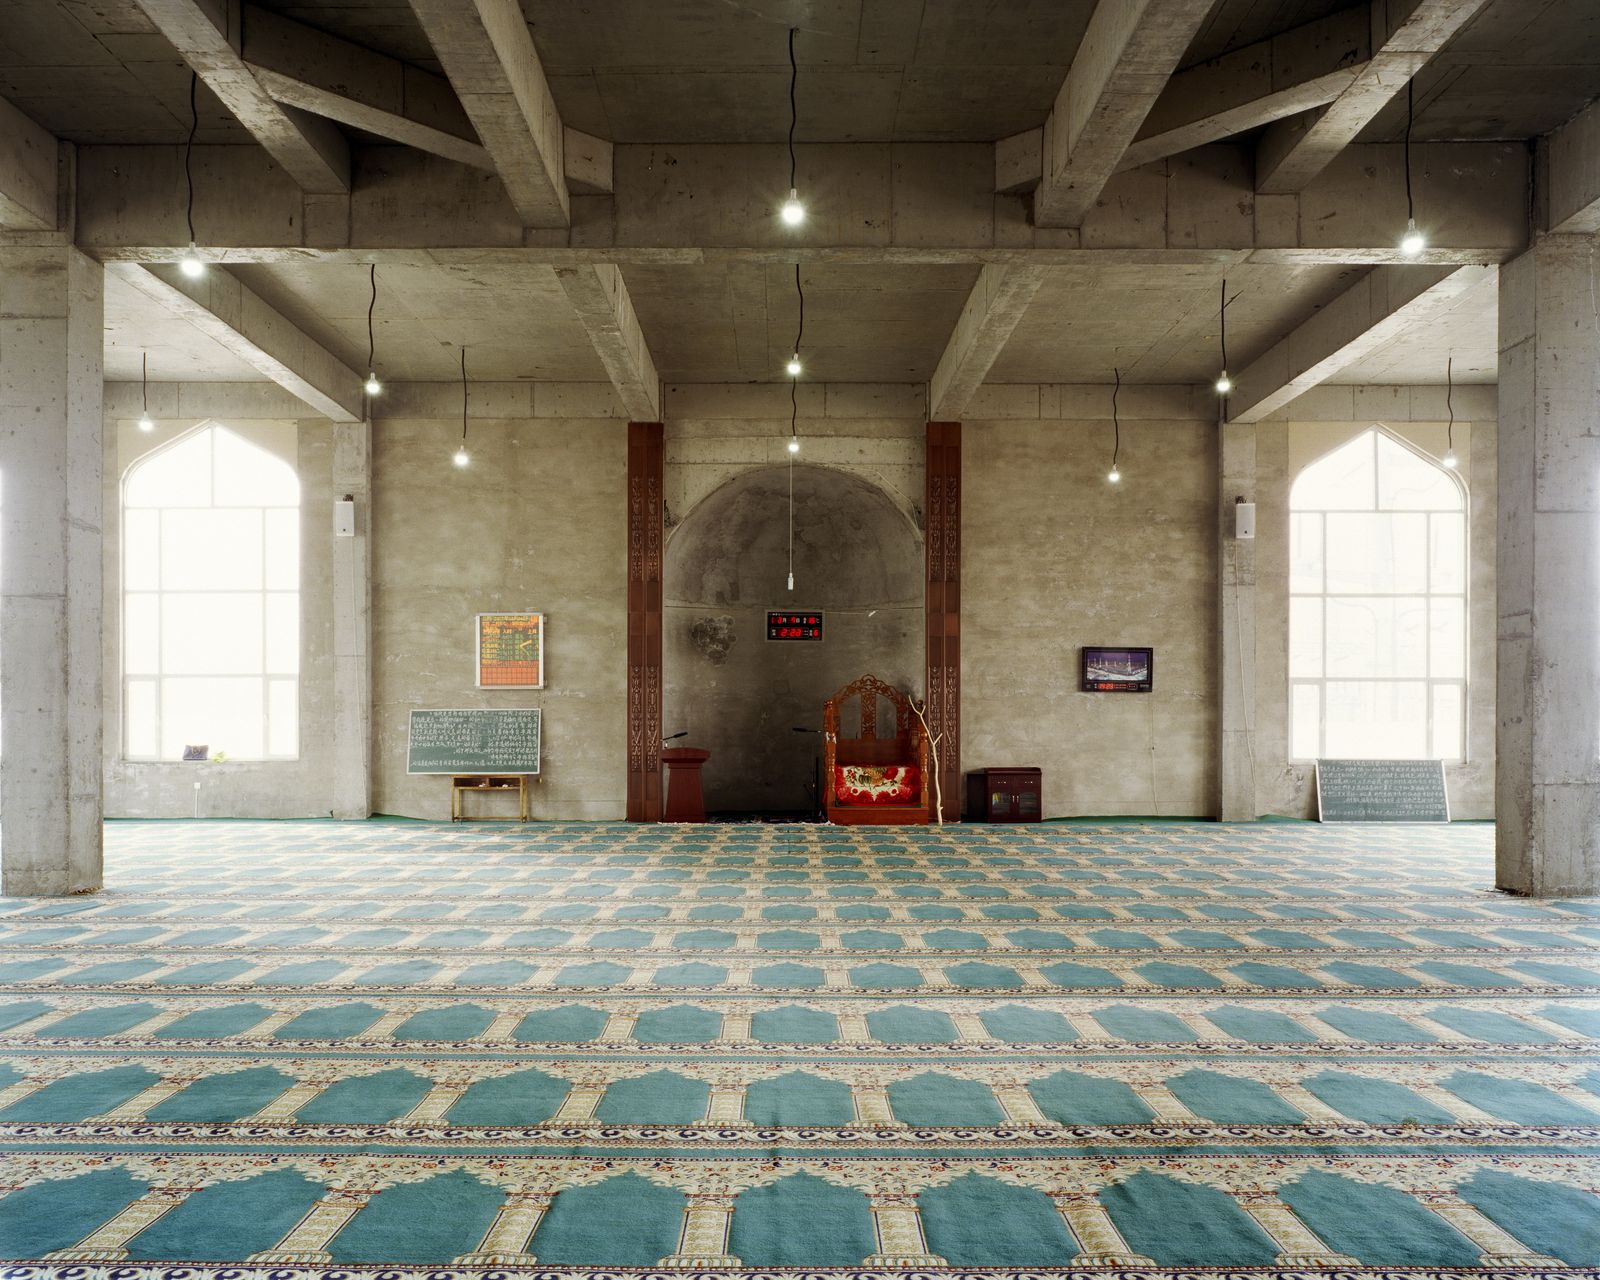 © Li Ming - Image from the Beneath the Citadels: The Visible Islamic World photography project